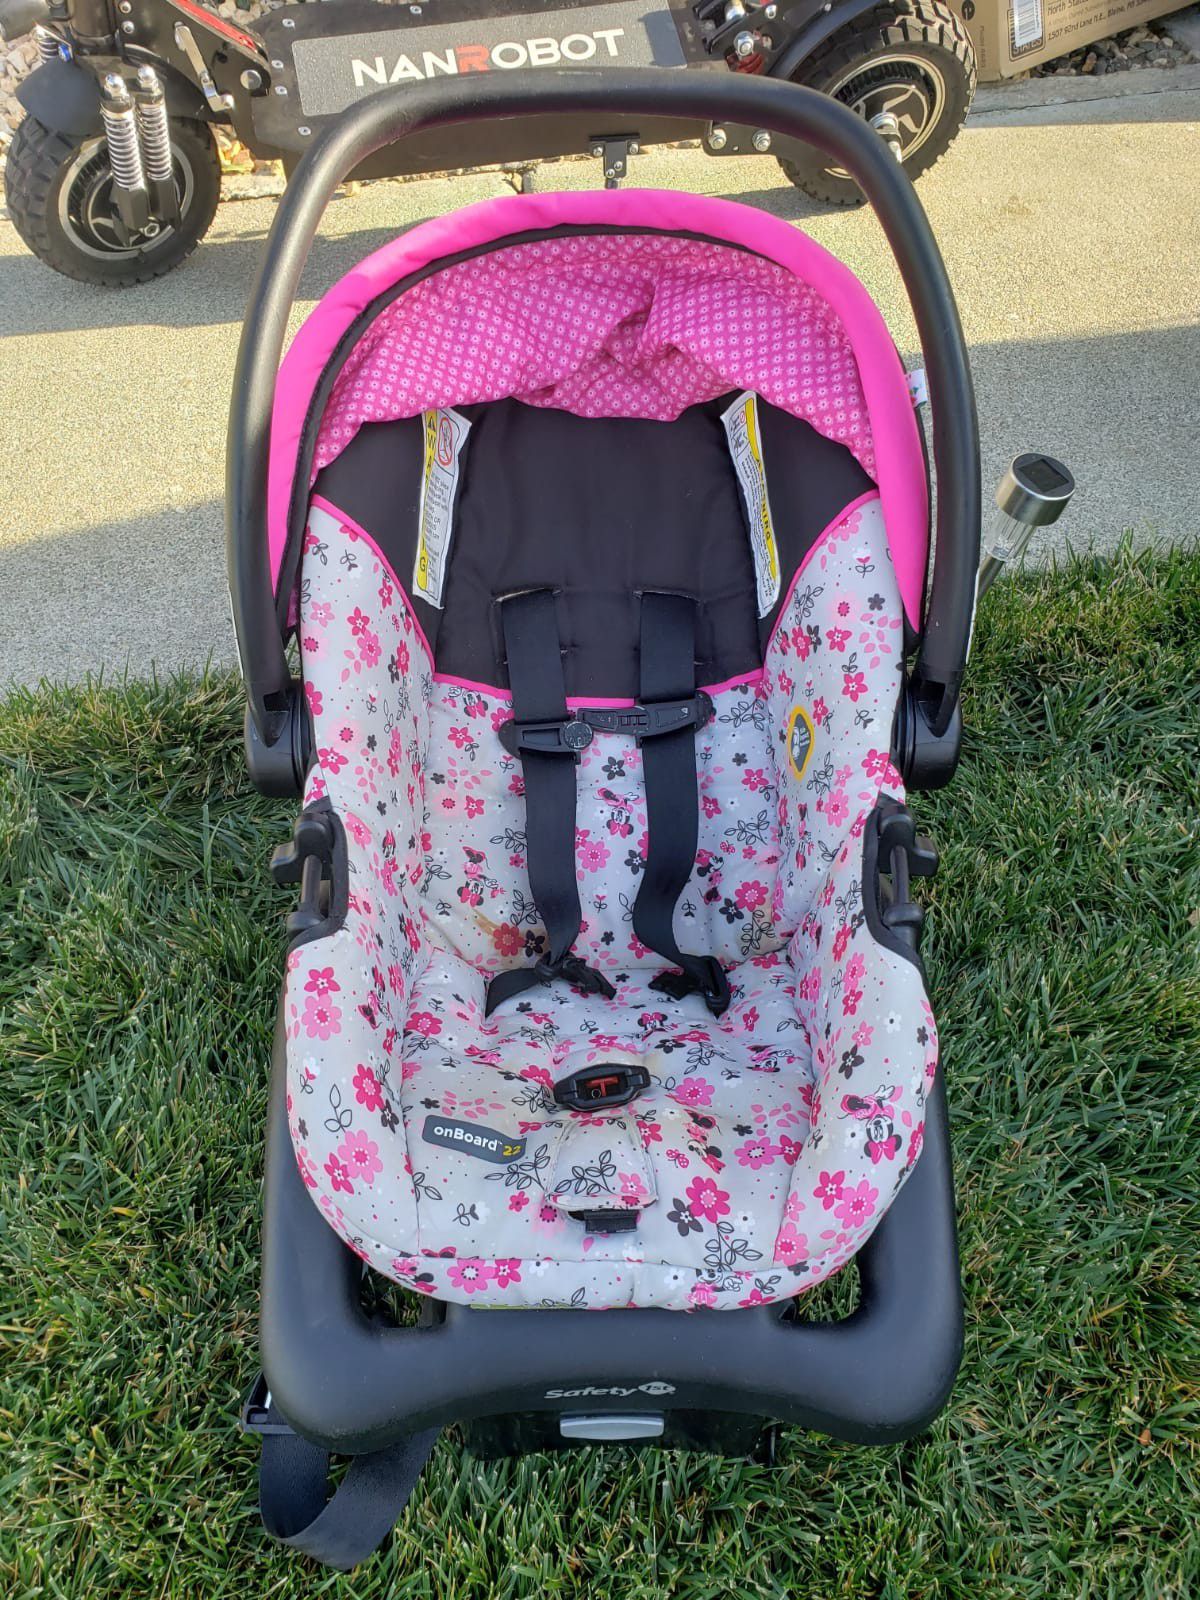 Baby/Infant car seat/matching stroller!